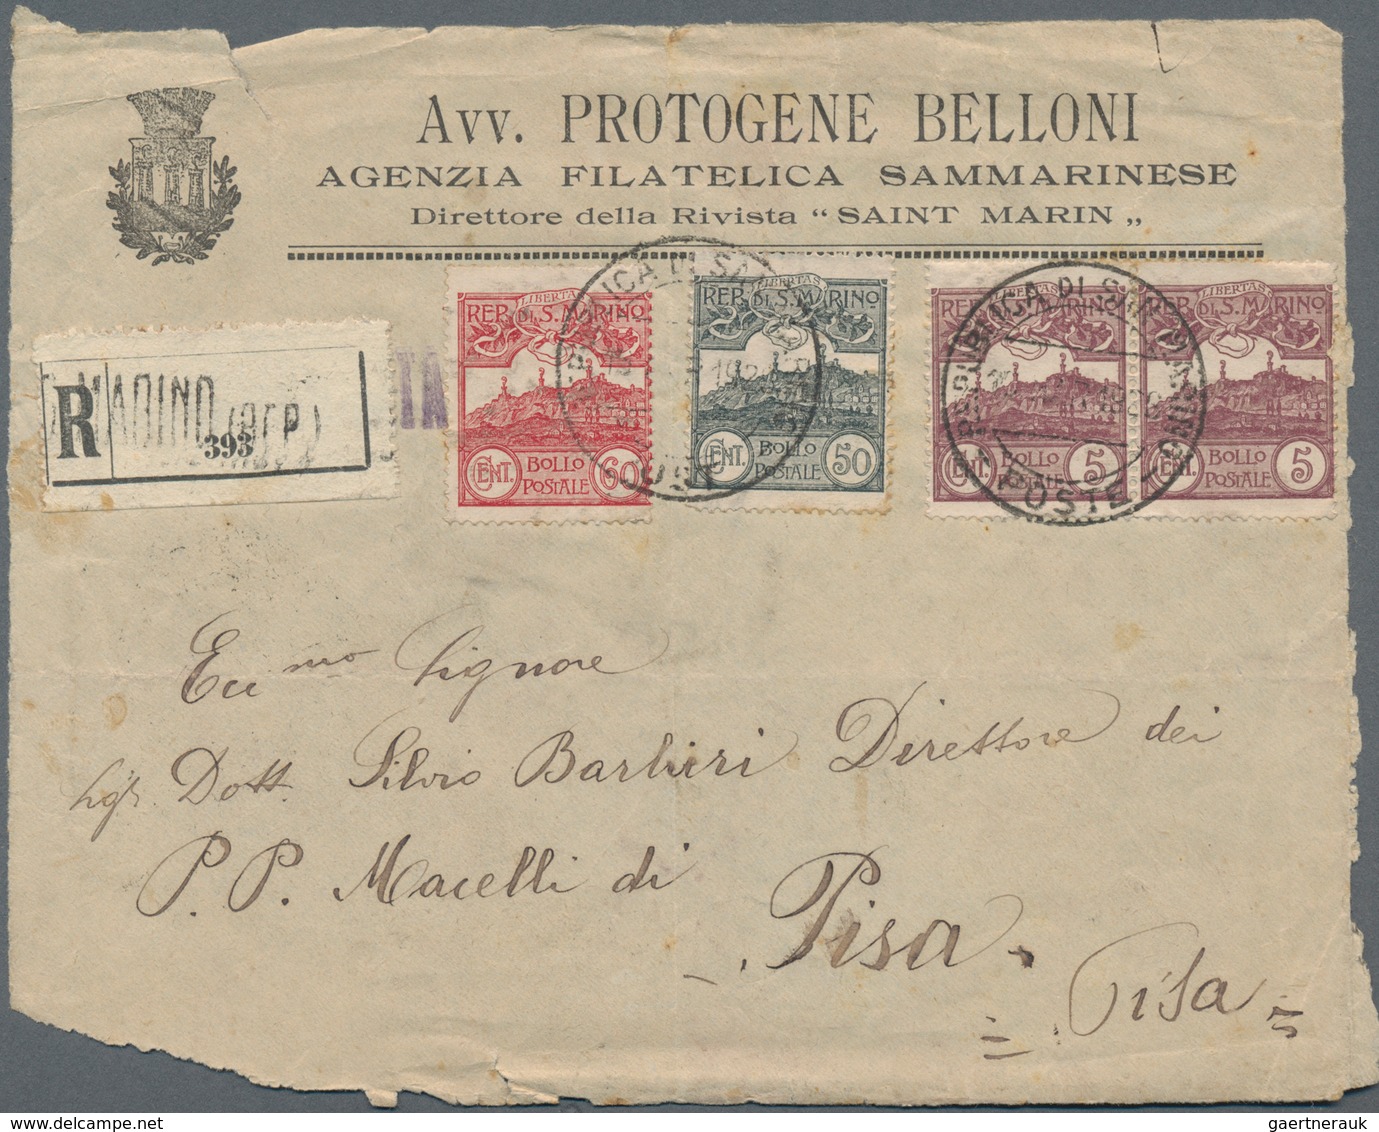 San Marino: 1873/1947: over 70 covers, starting with precursors and some nice early commercial used